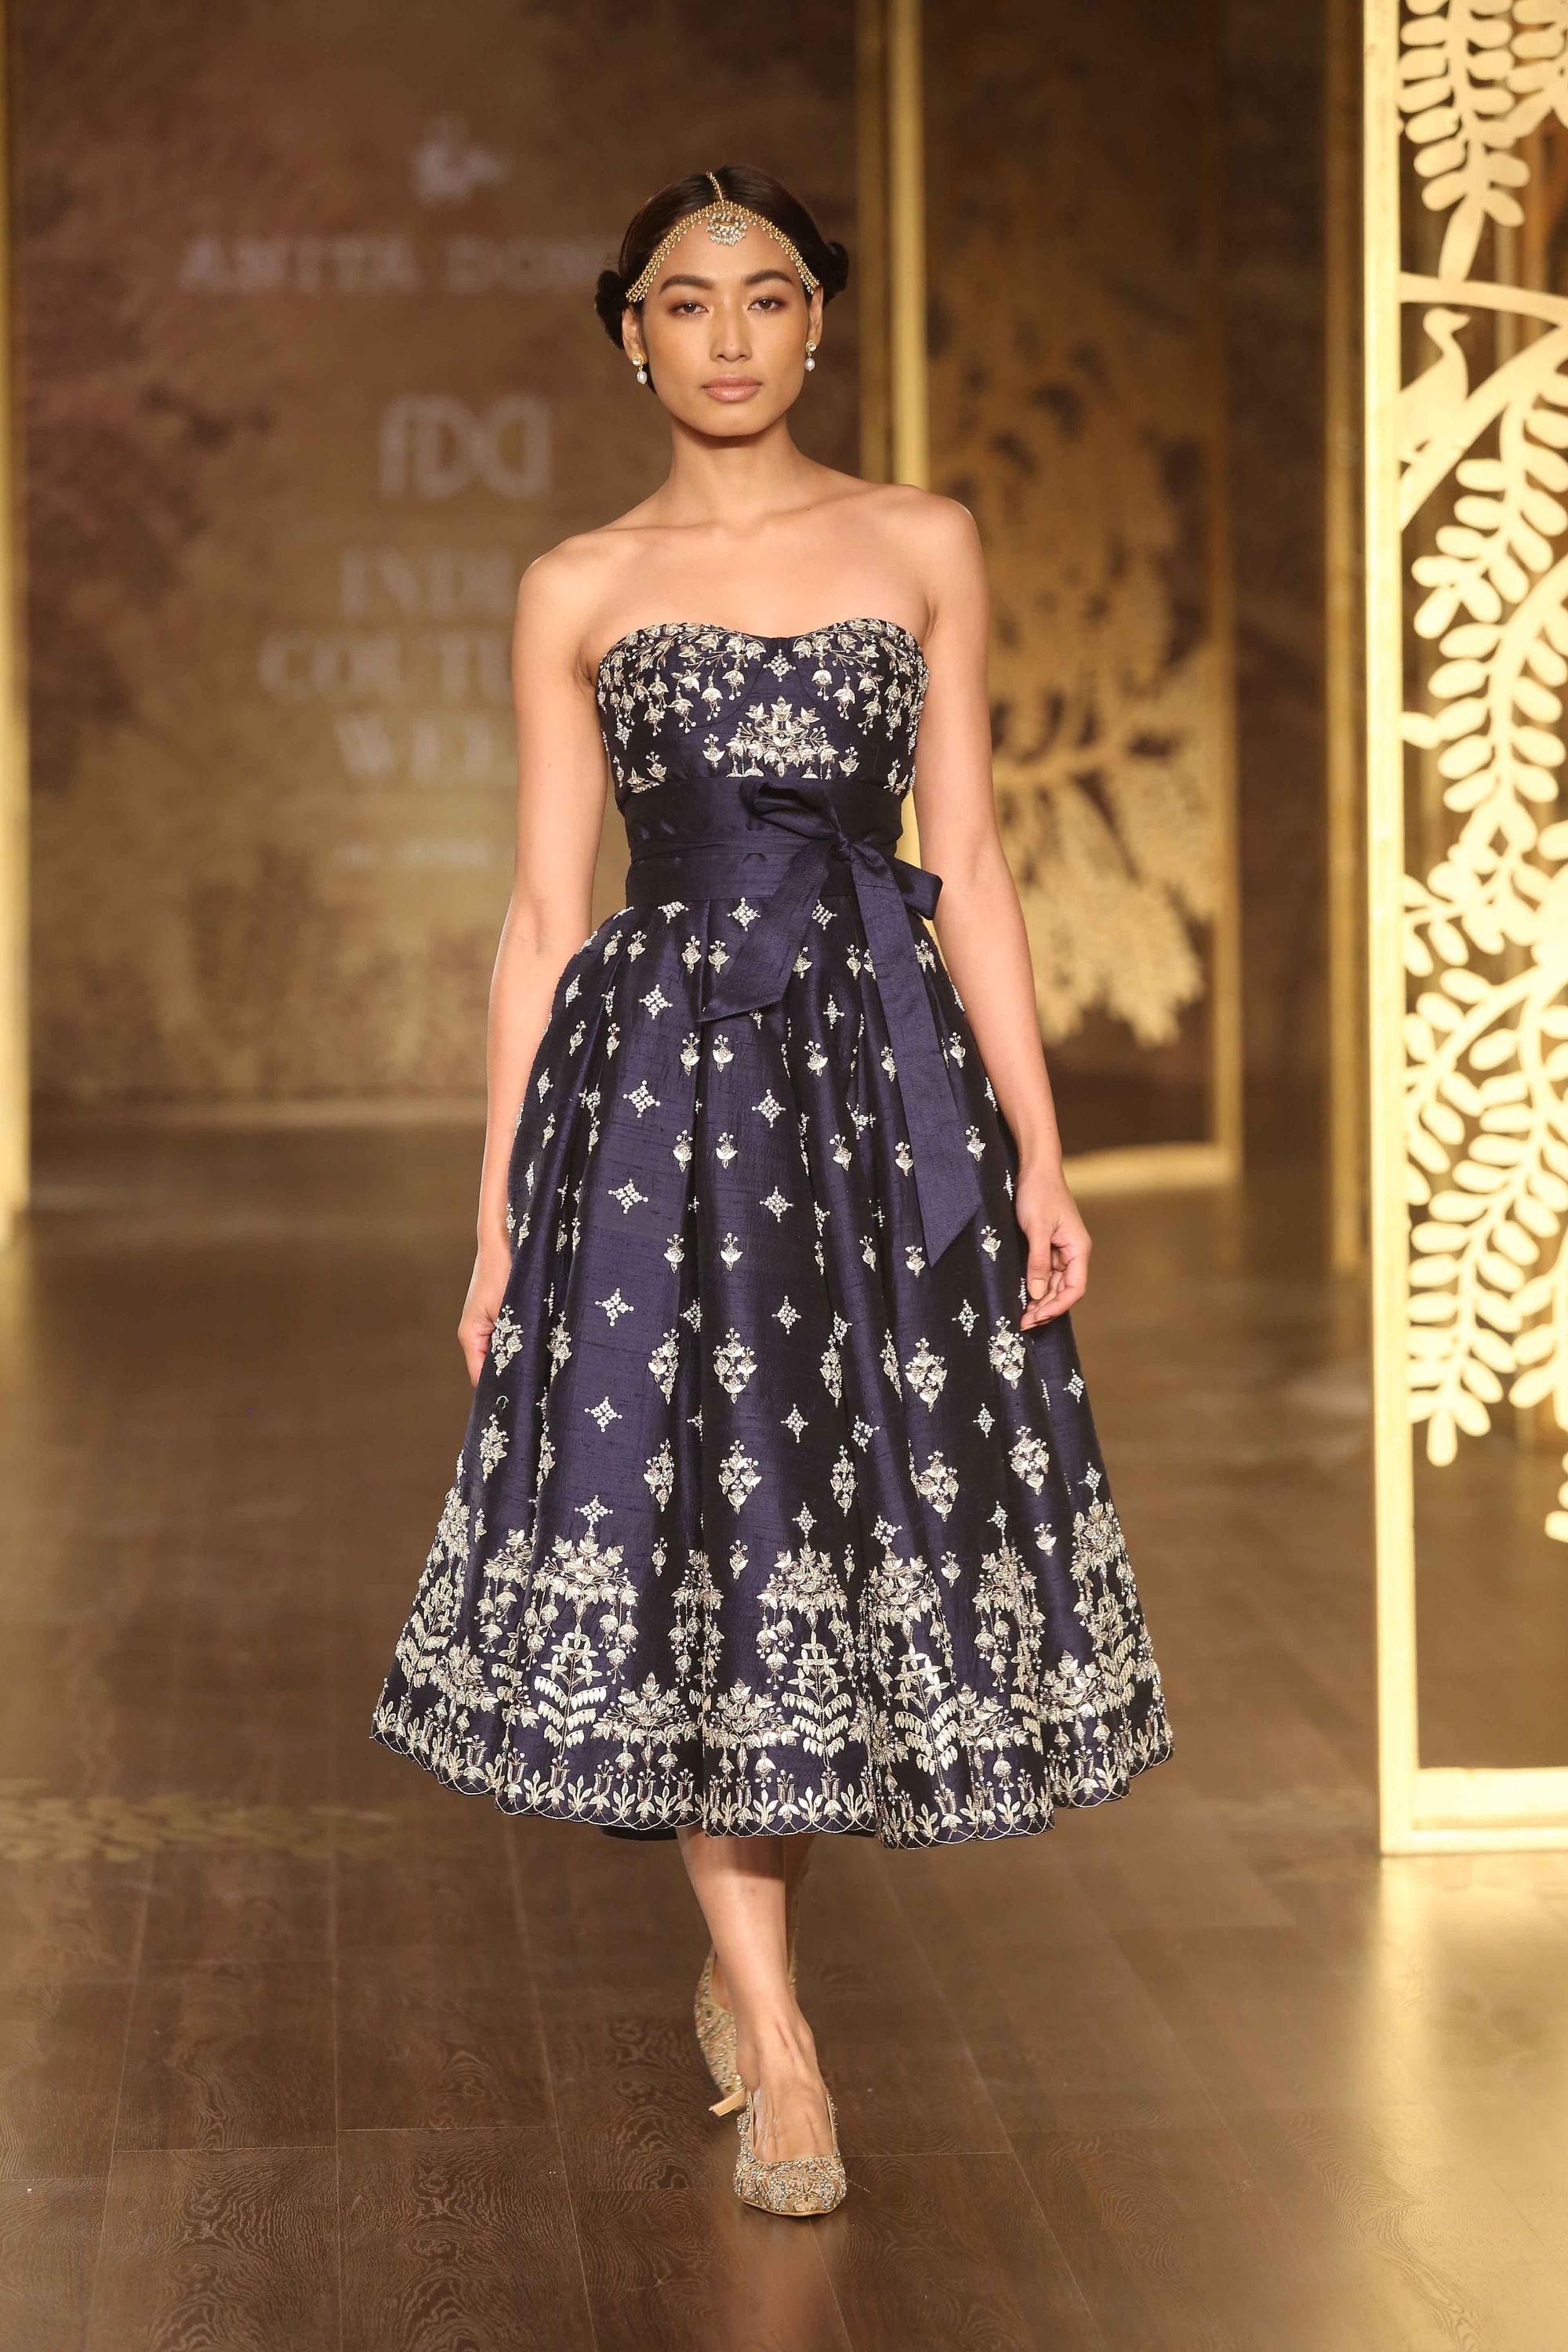 Anita Dongre hosts trunk show in London